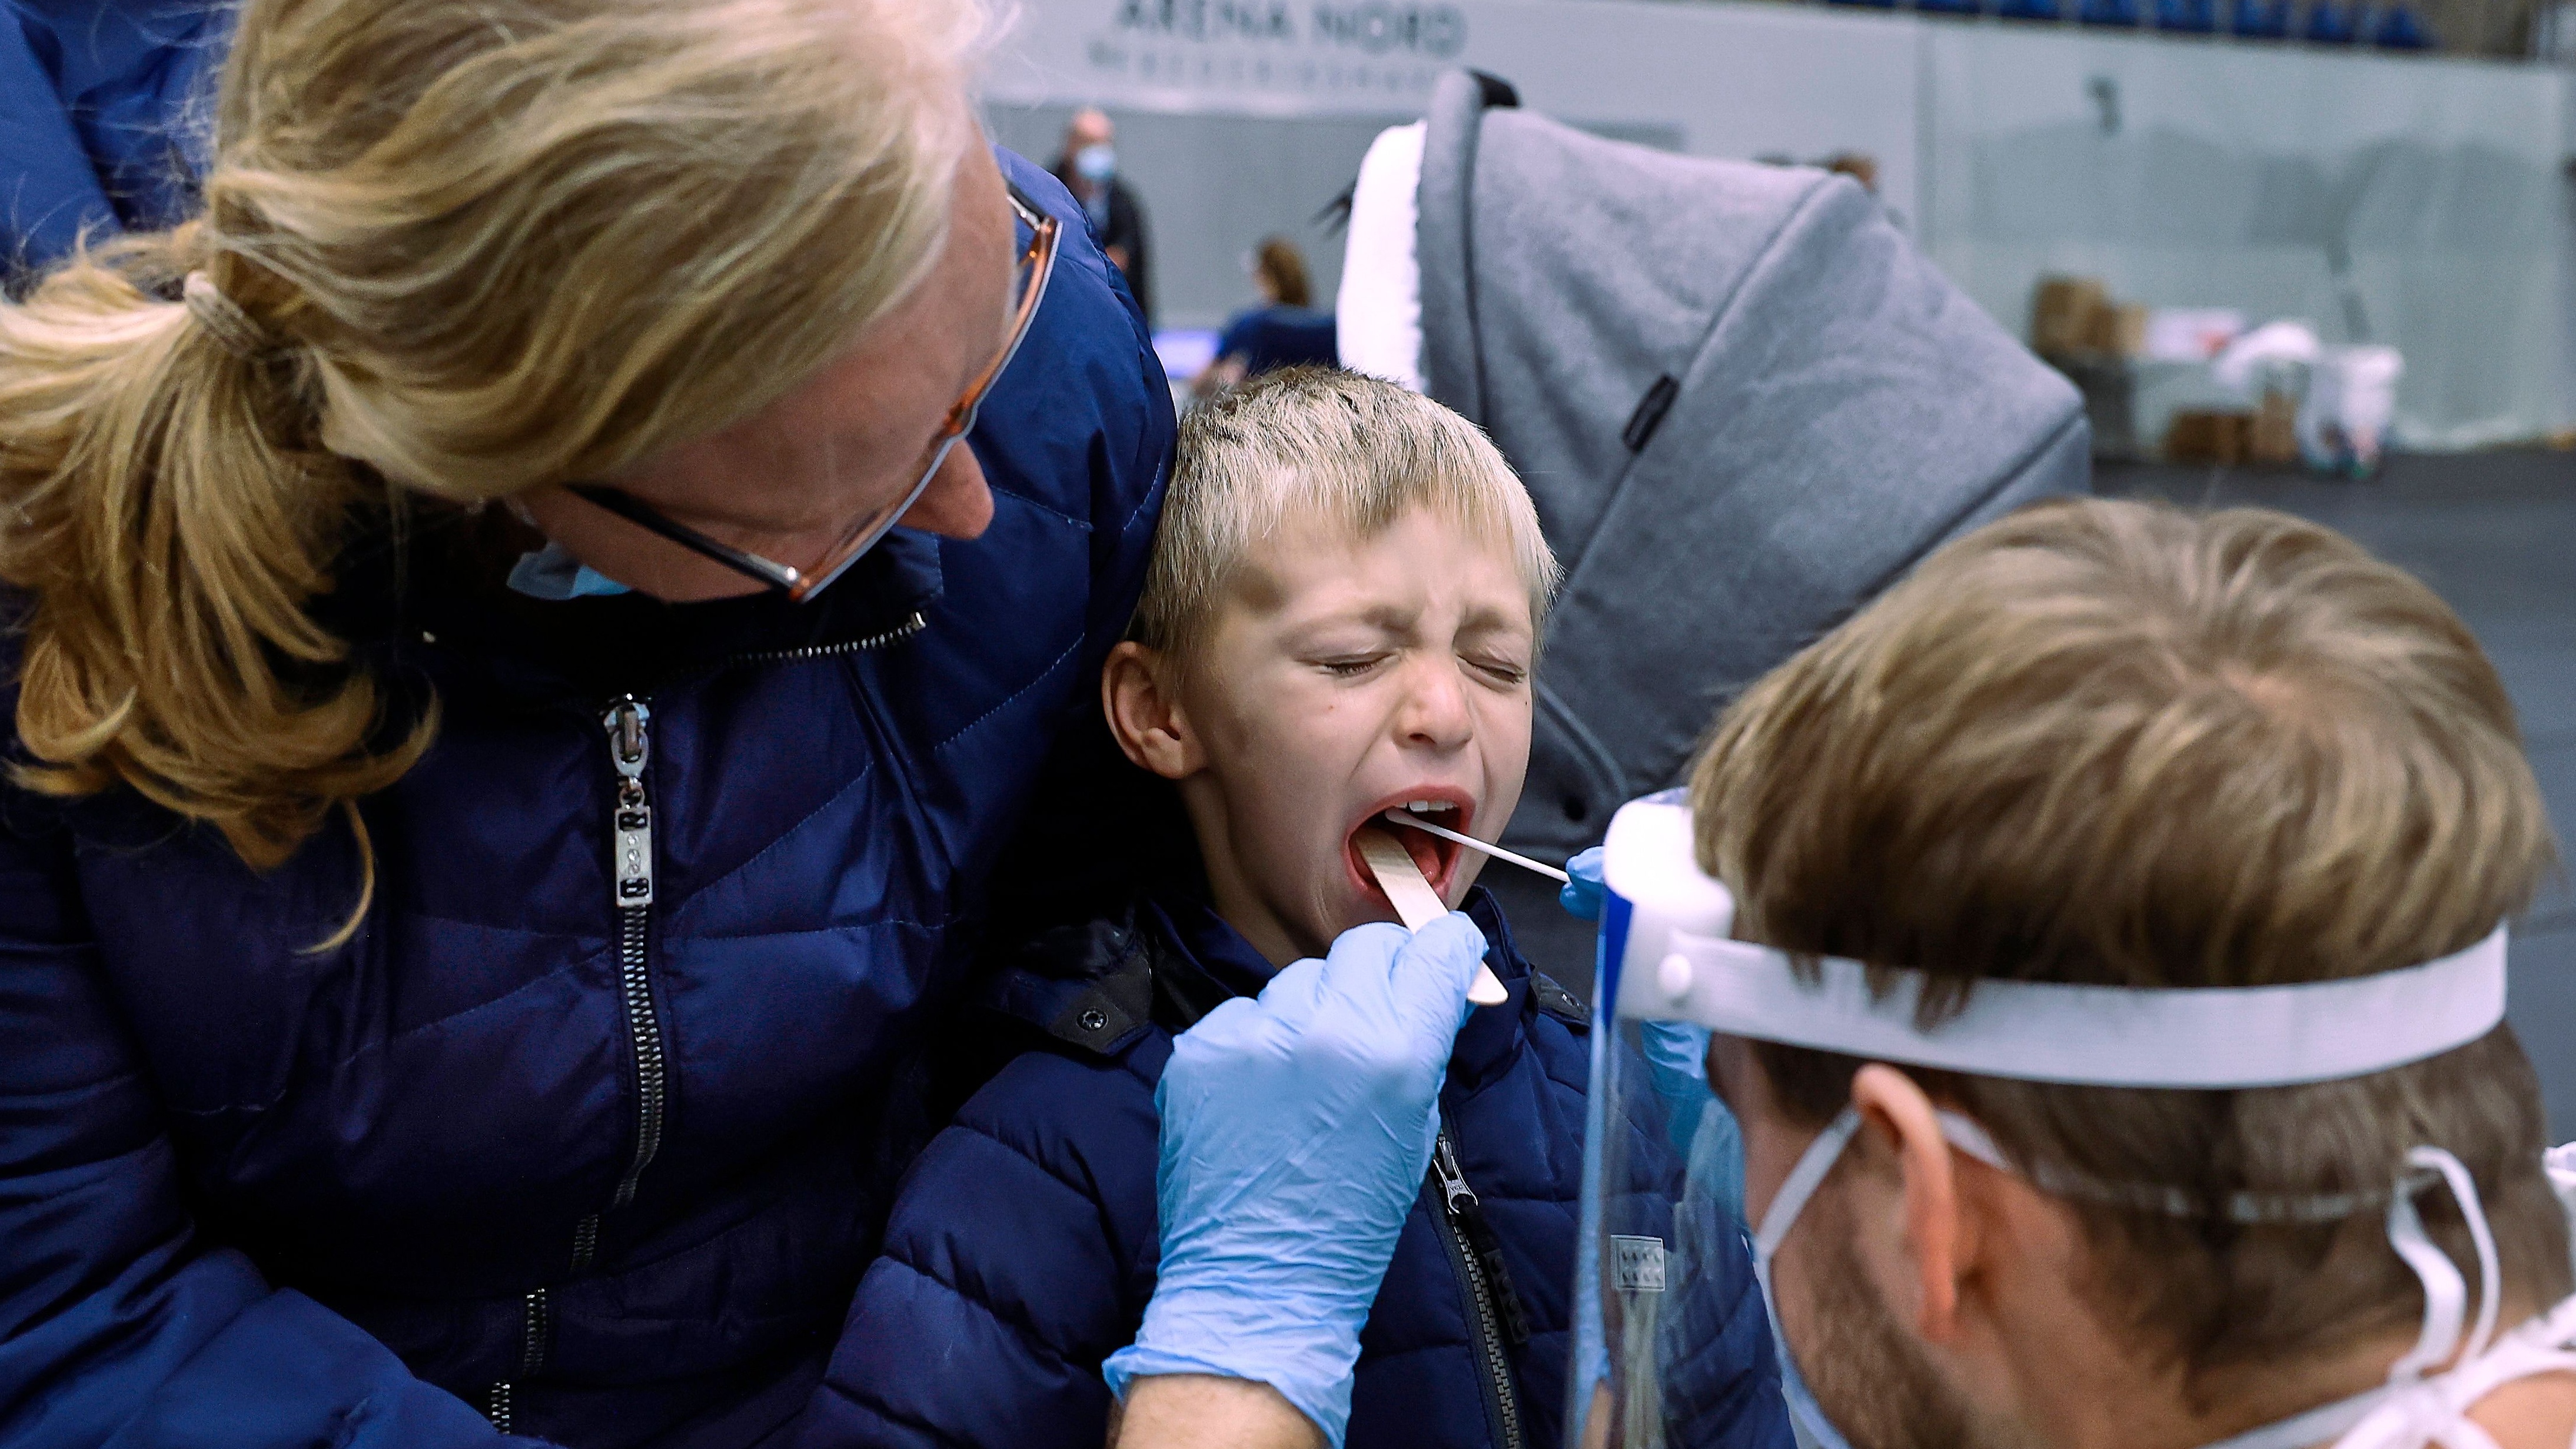 A child is swabbed during a Covid test in Northern Jutland, Denmark